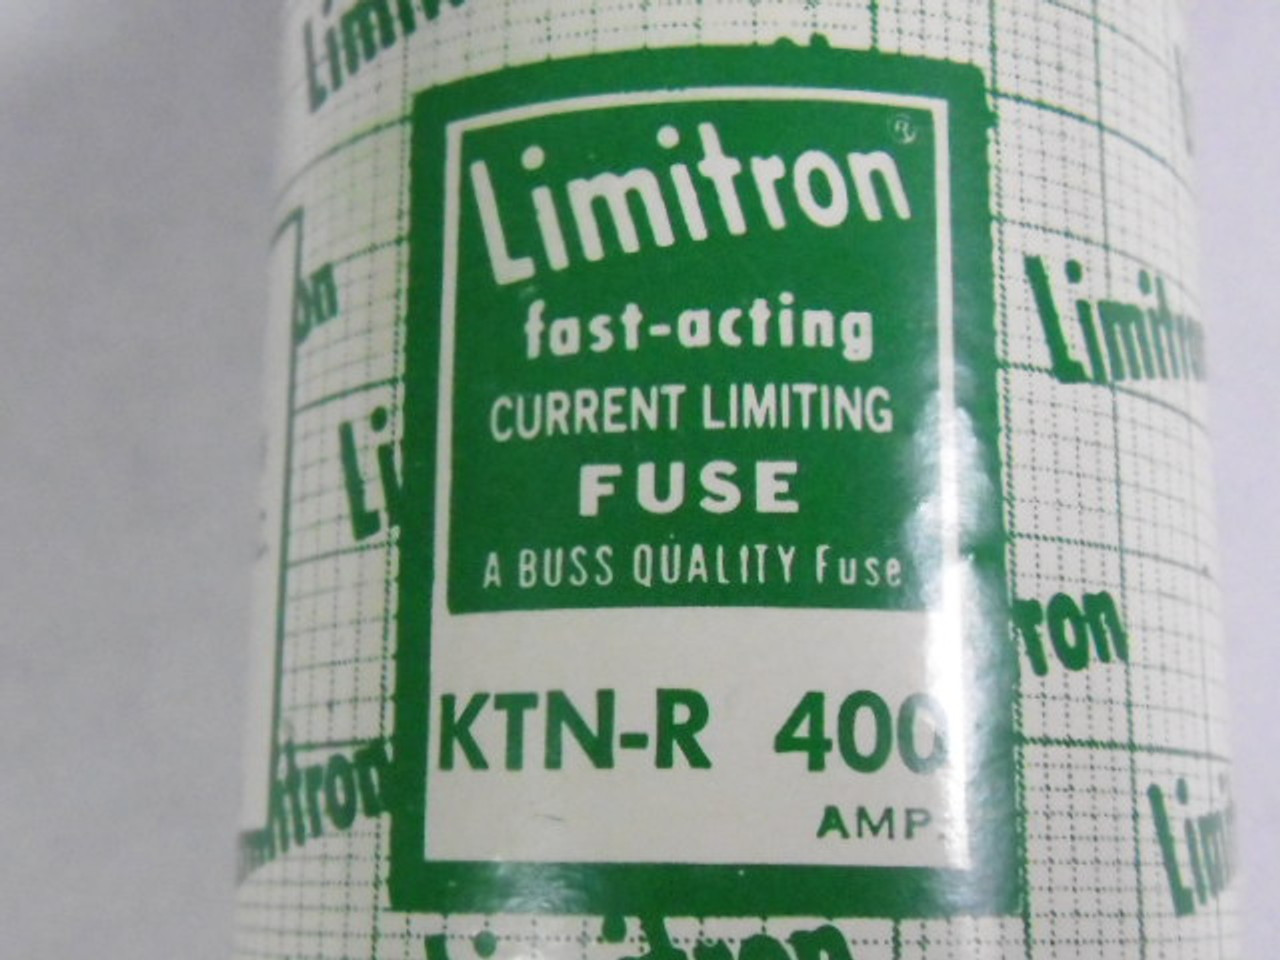 Limitron KTN-R-400 Fast Acting Current Limiting Fuse 400A 250V USED